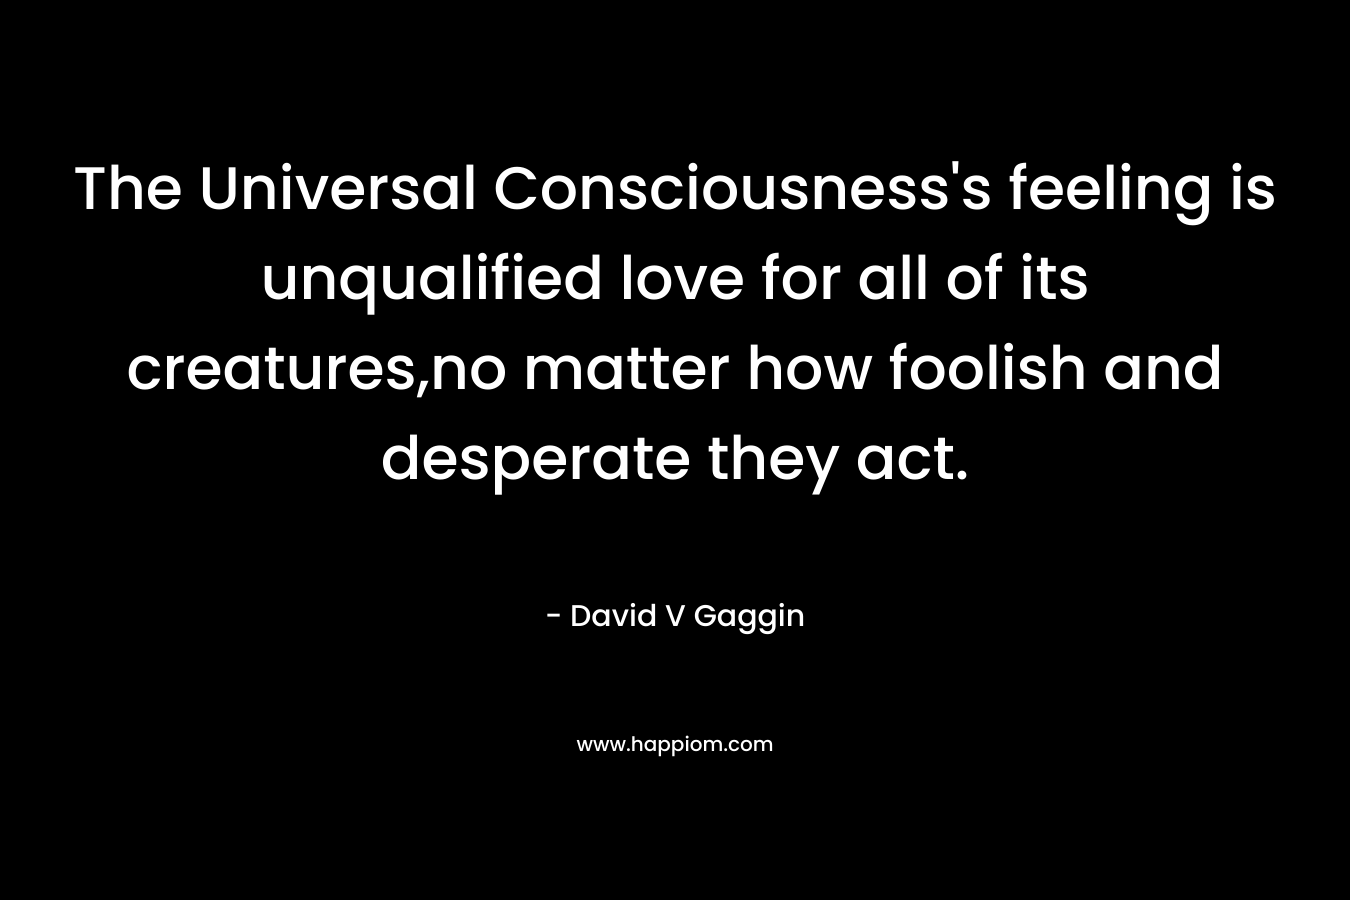 The Universal Consciousness’s feeling is unqualified love for all of its creatures,no matter how foolish and desperate they act. – David V Gaggin